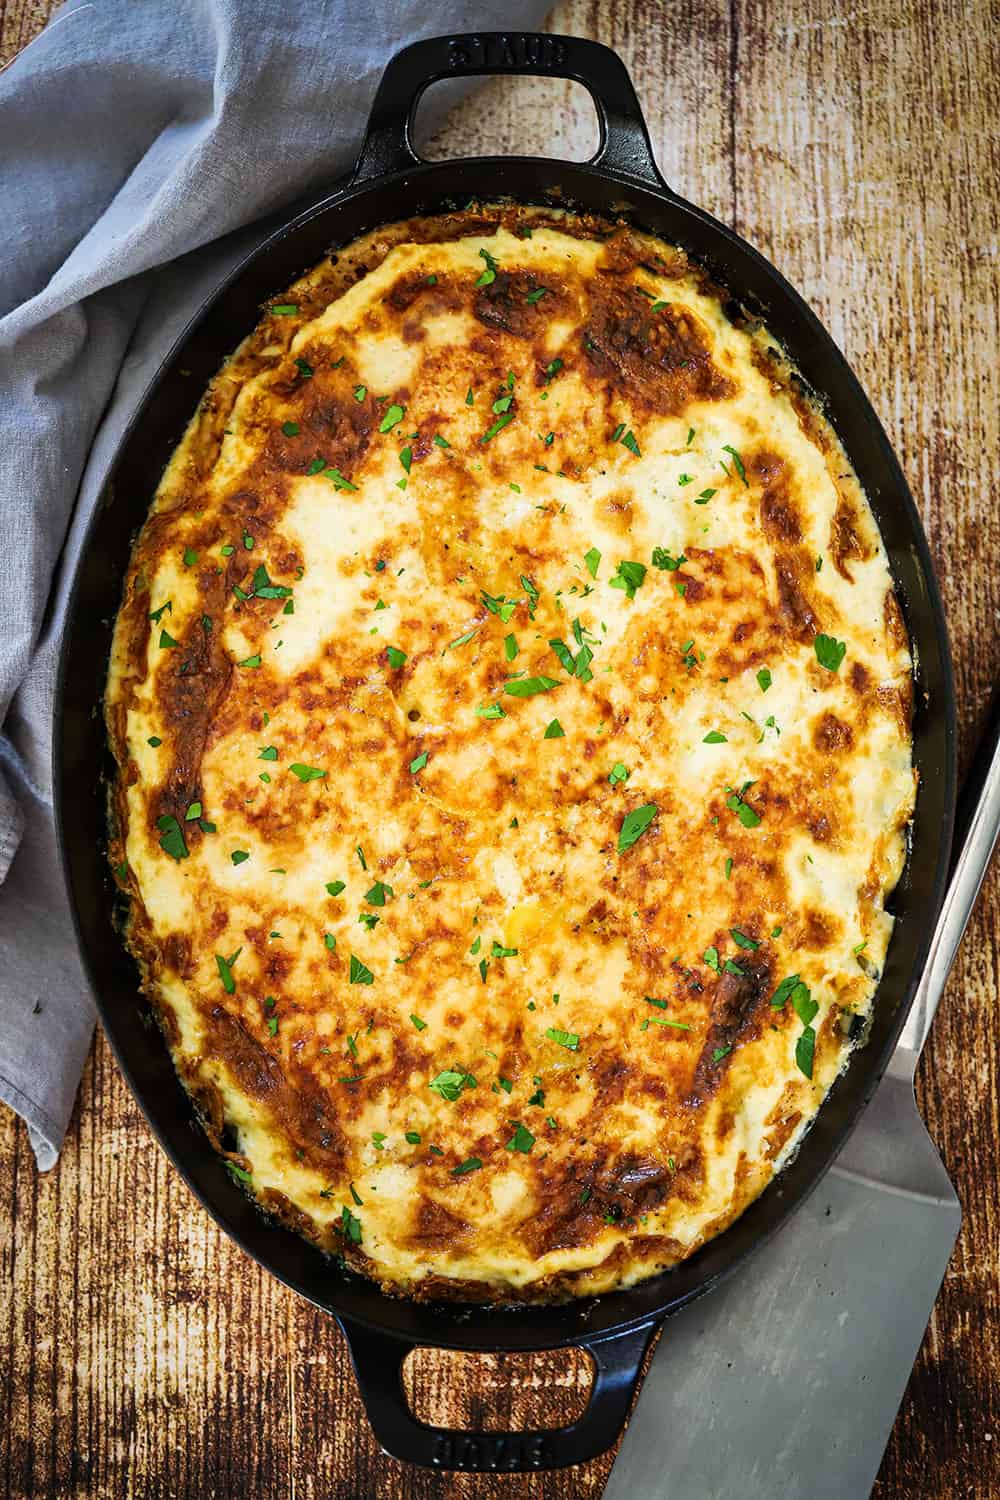 A large oval baking dish with handles filled with potatoes dauphinoise.